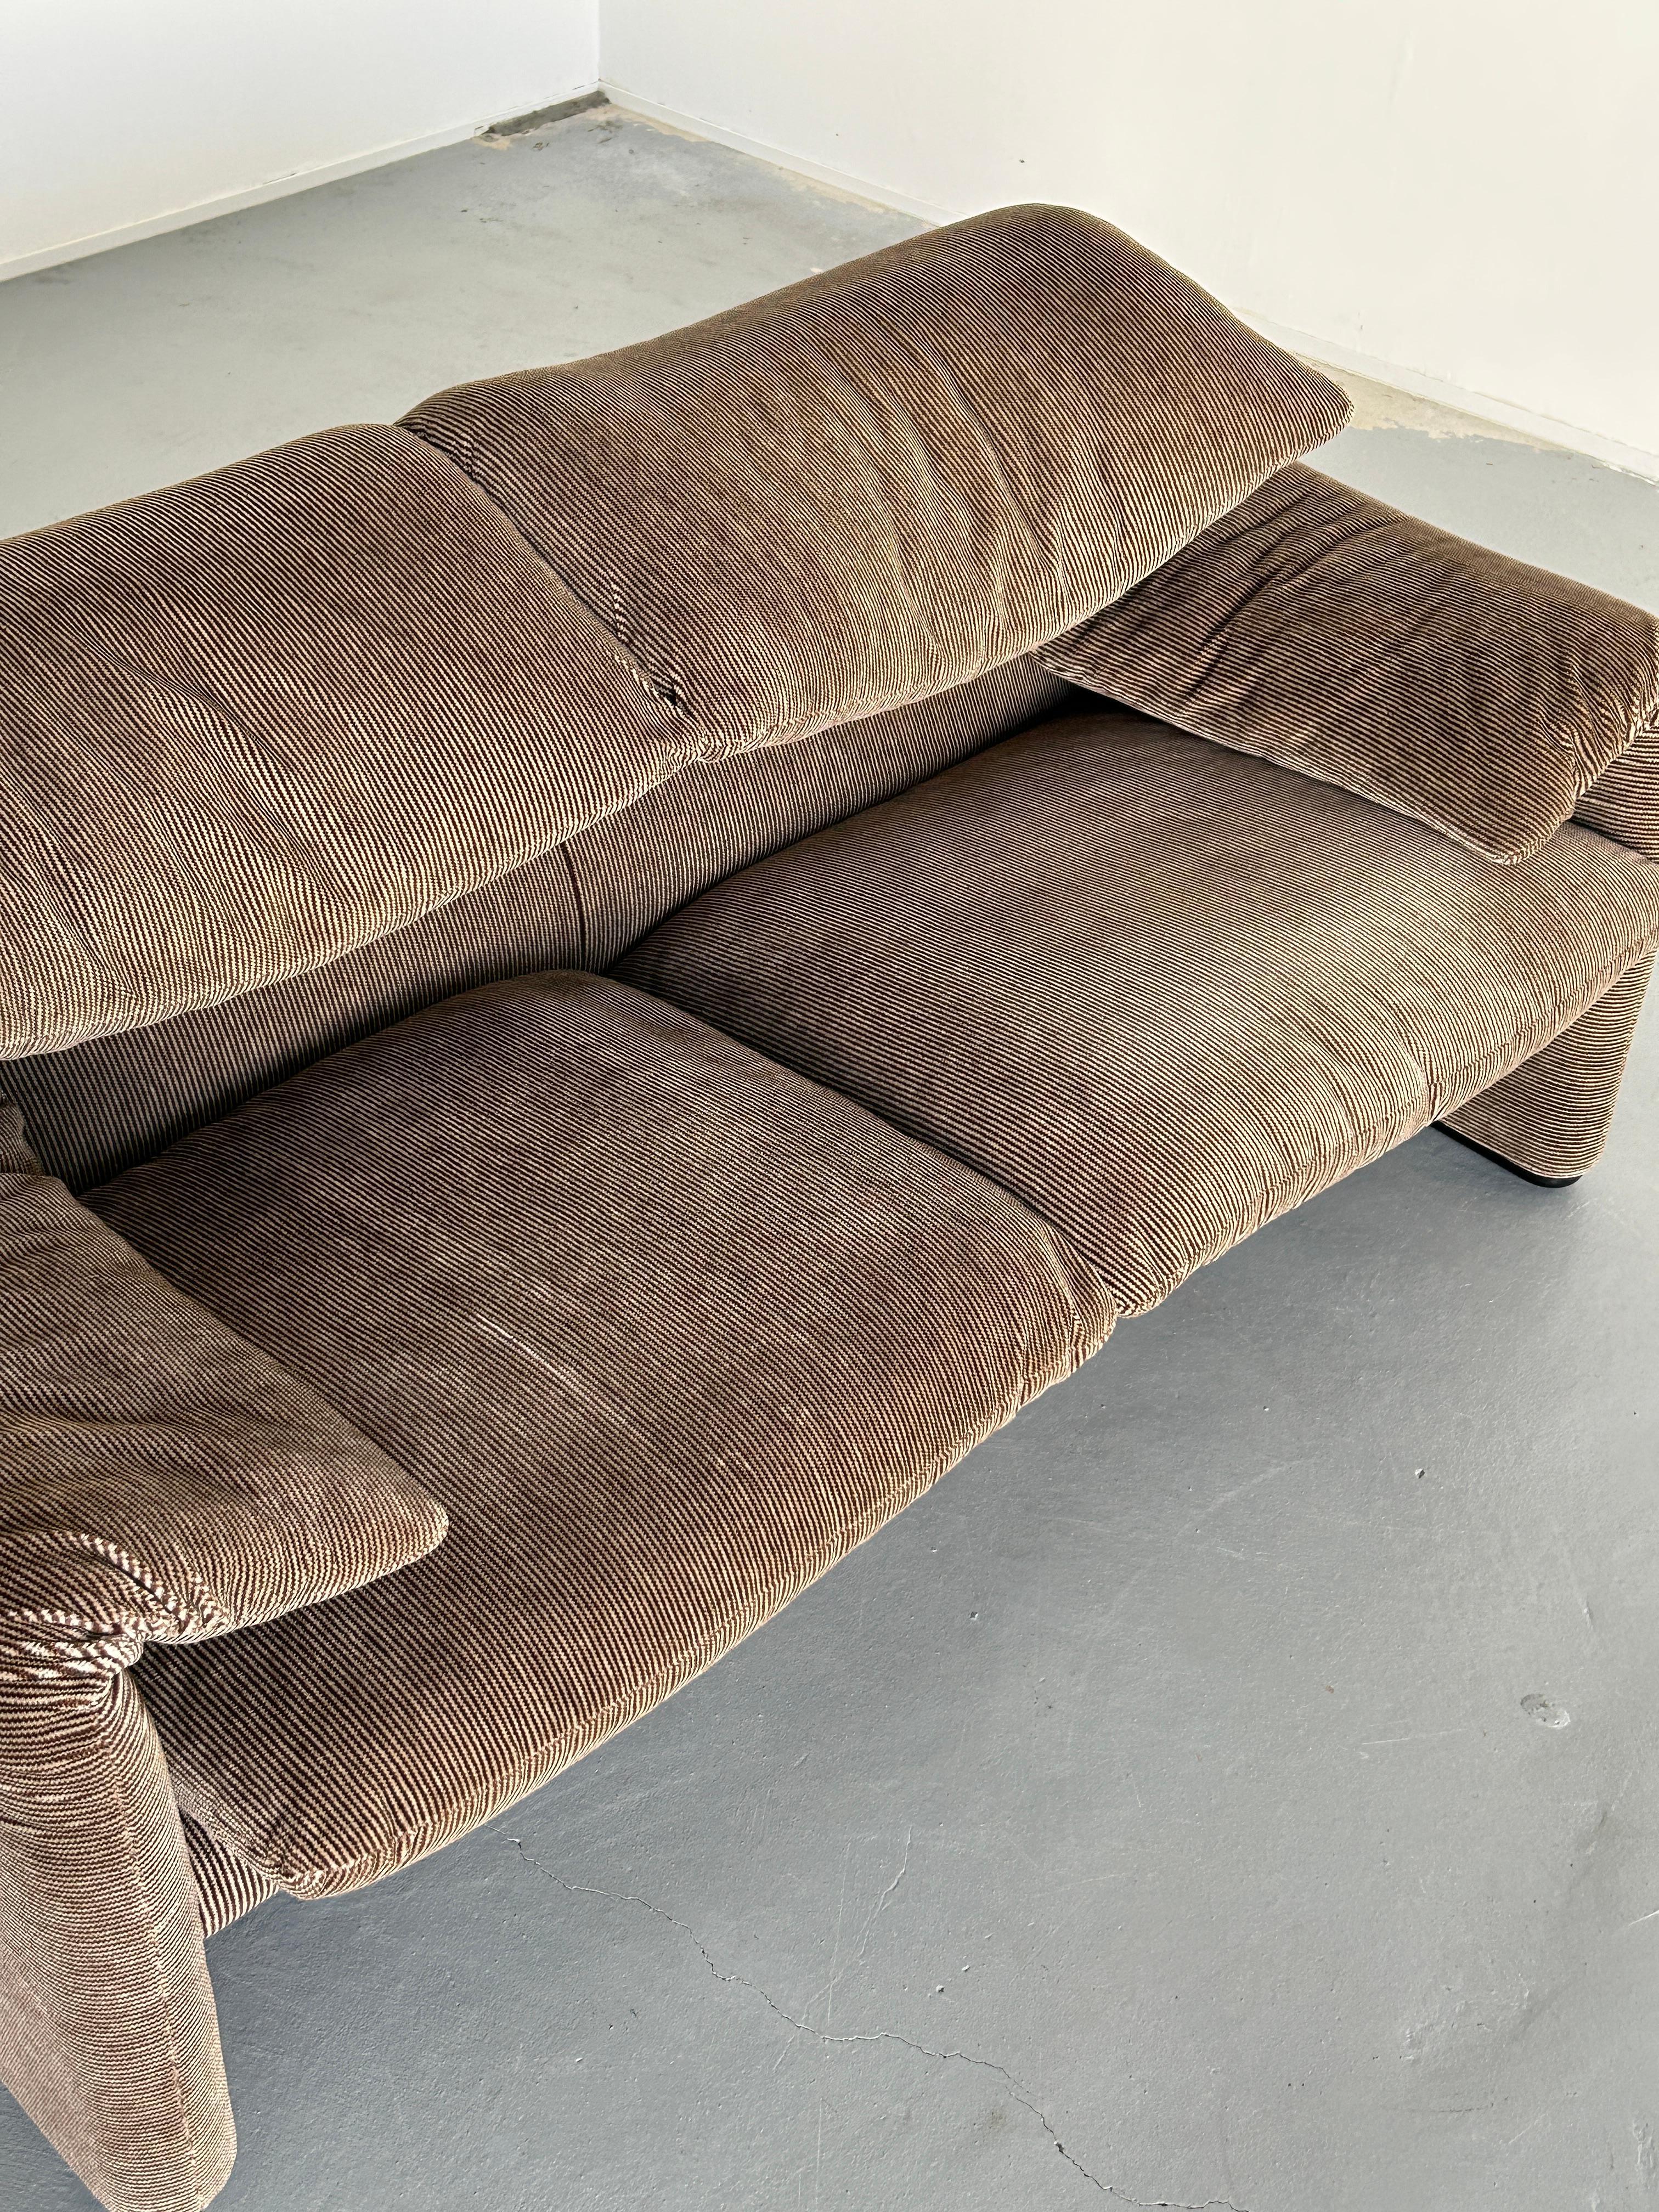 Late 20th Century Vintage 'Maralunga' Iconic Two-Seater Sofa by Vico Magistretti for Cassina, 70s